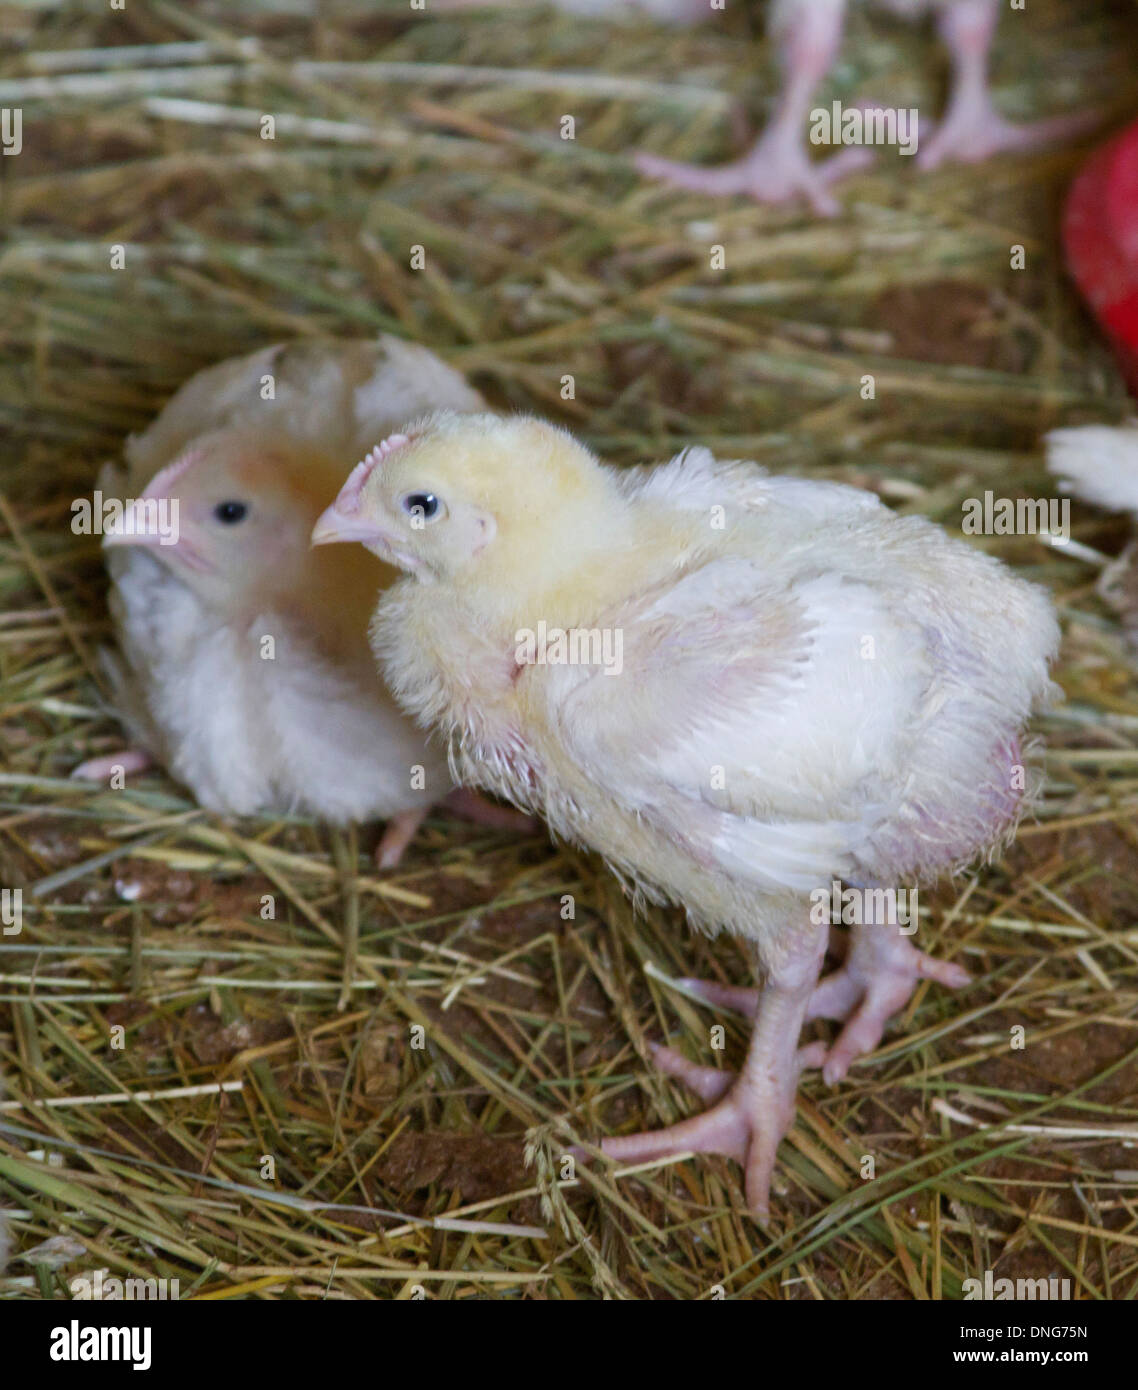 Close up of baby chickens being raised on a farm Stock Photo